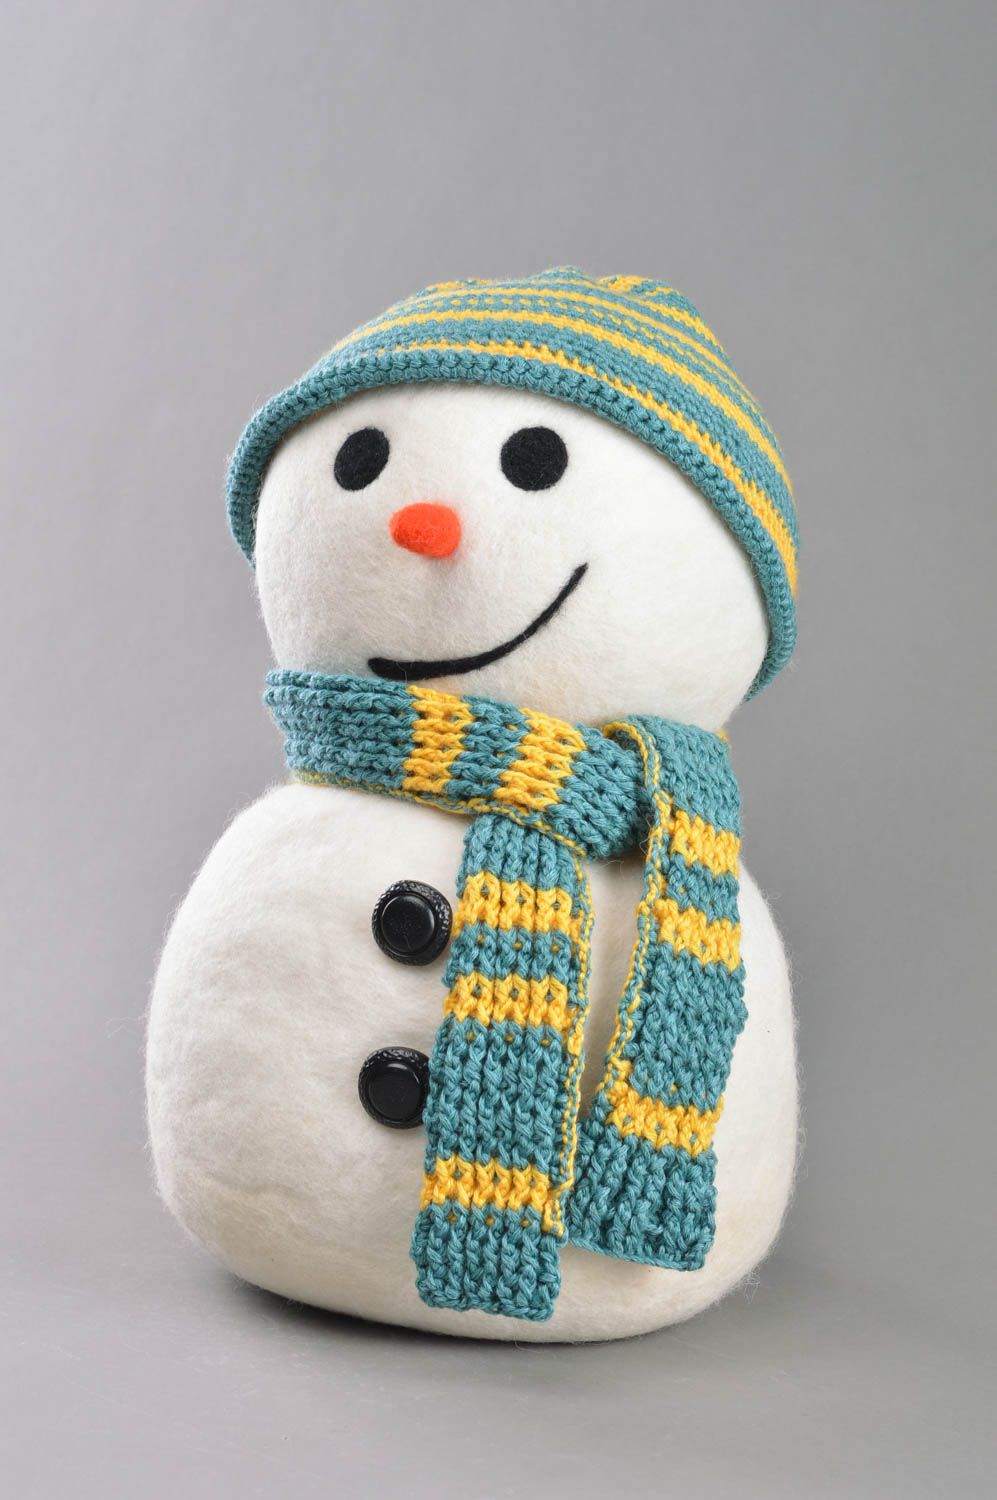 Unusual beautiful handmade felted wool toy snowman for home decor photo 1